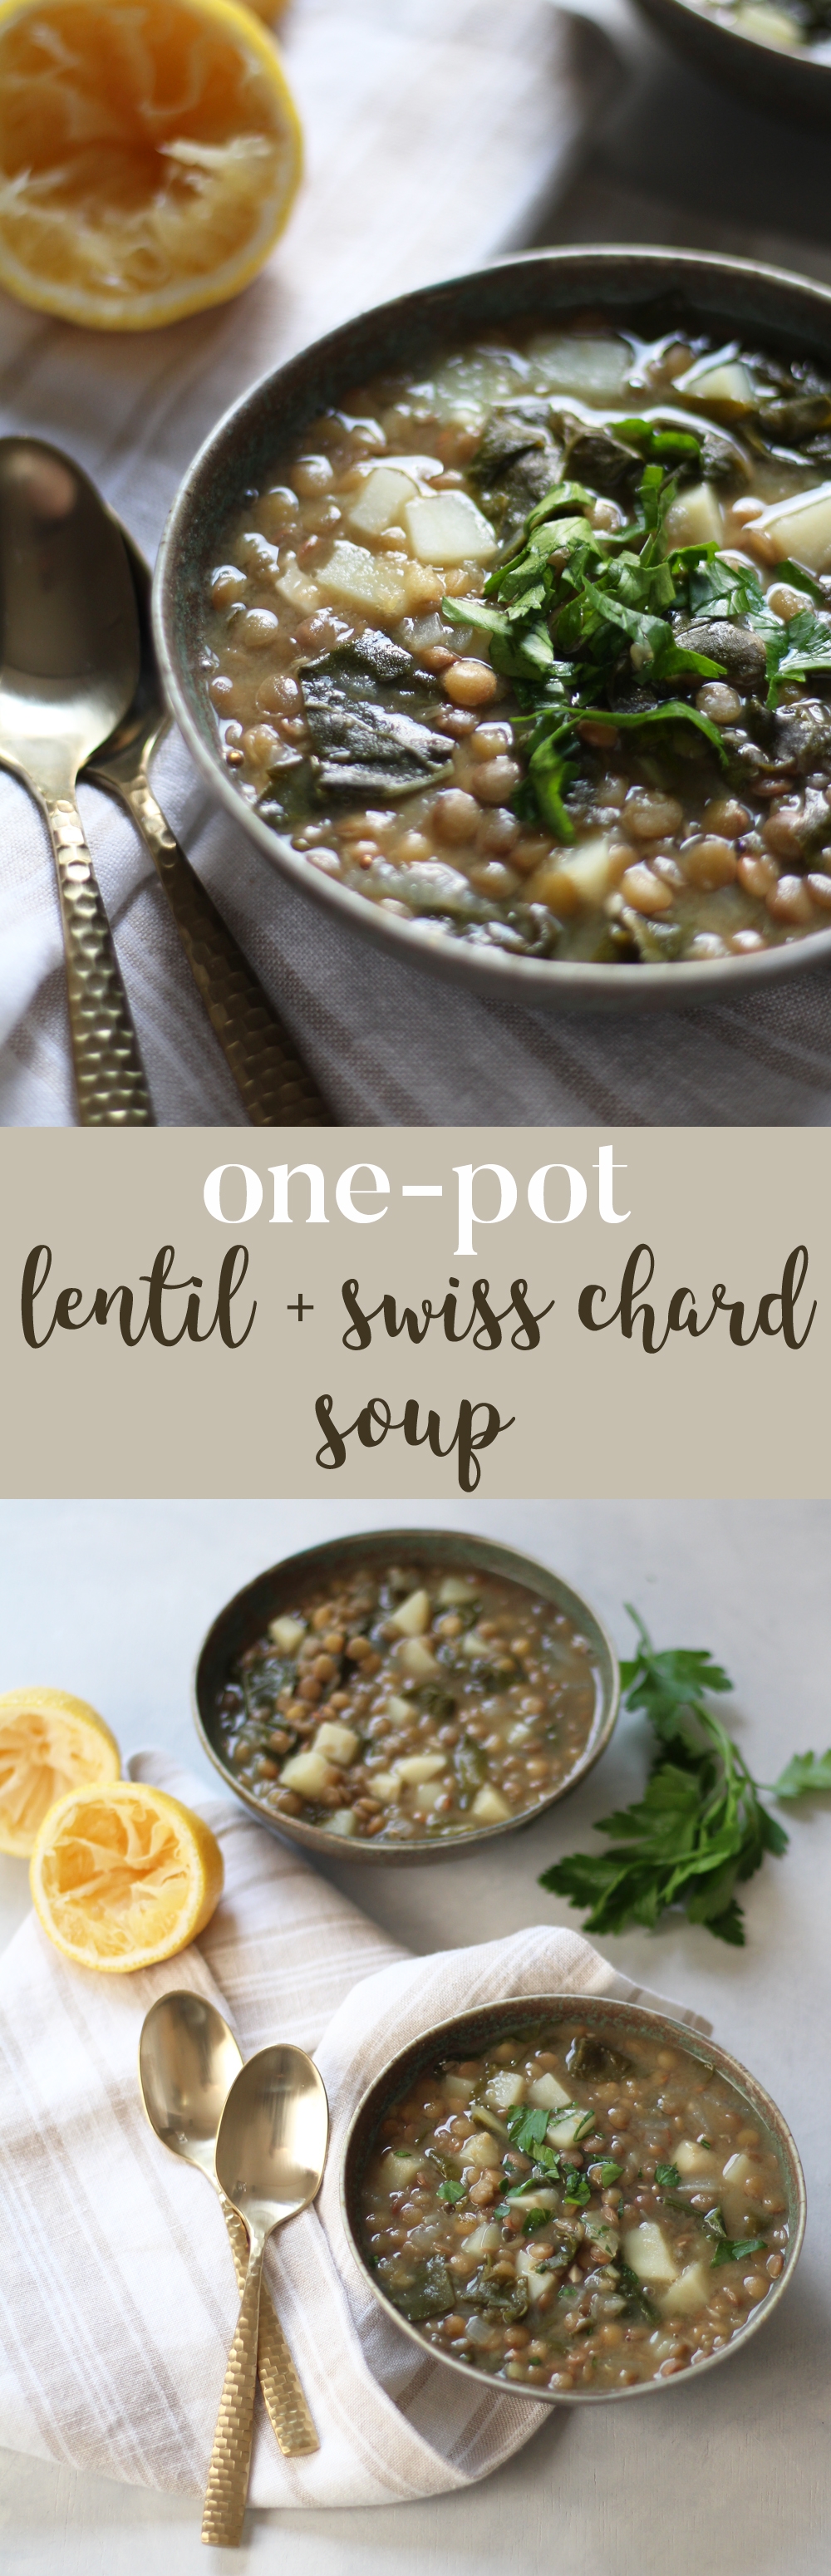 One-Pot Lentil and Swiss Chard Soup - the perfect, easy soup for chilly fall and winter days.